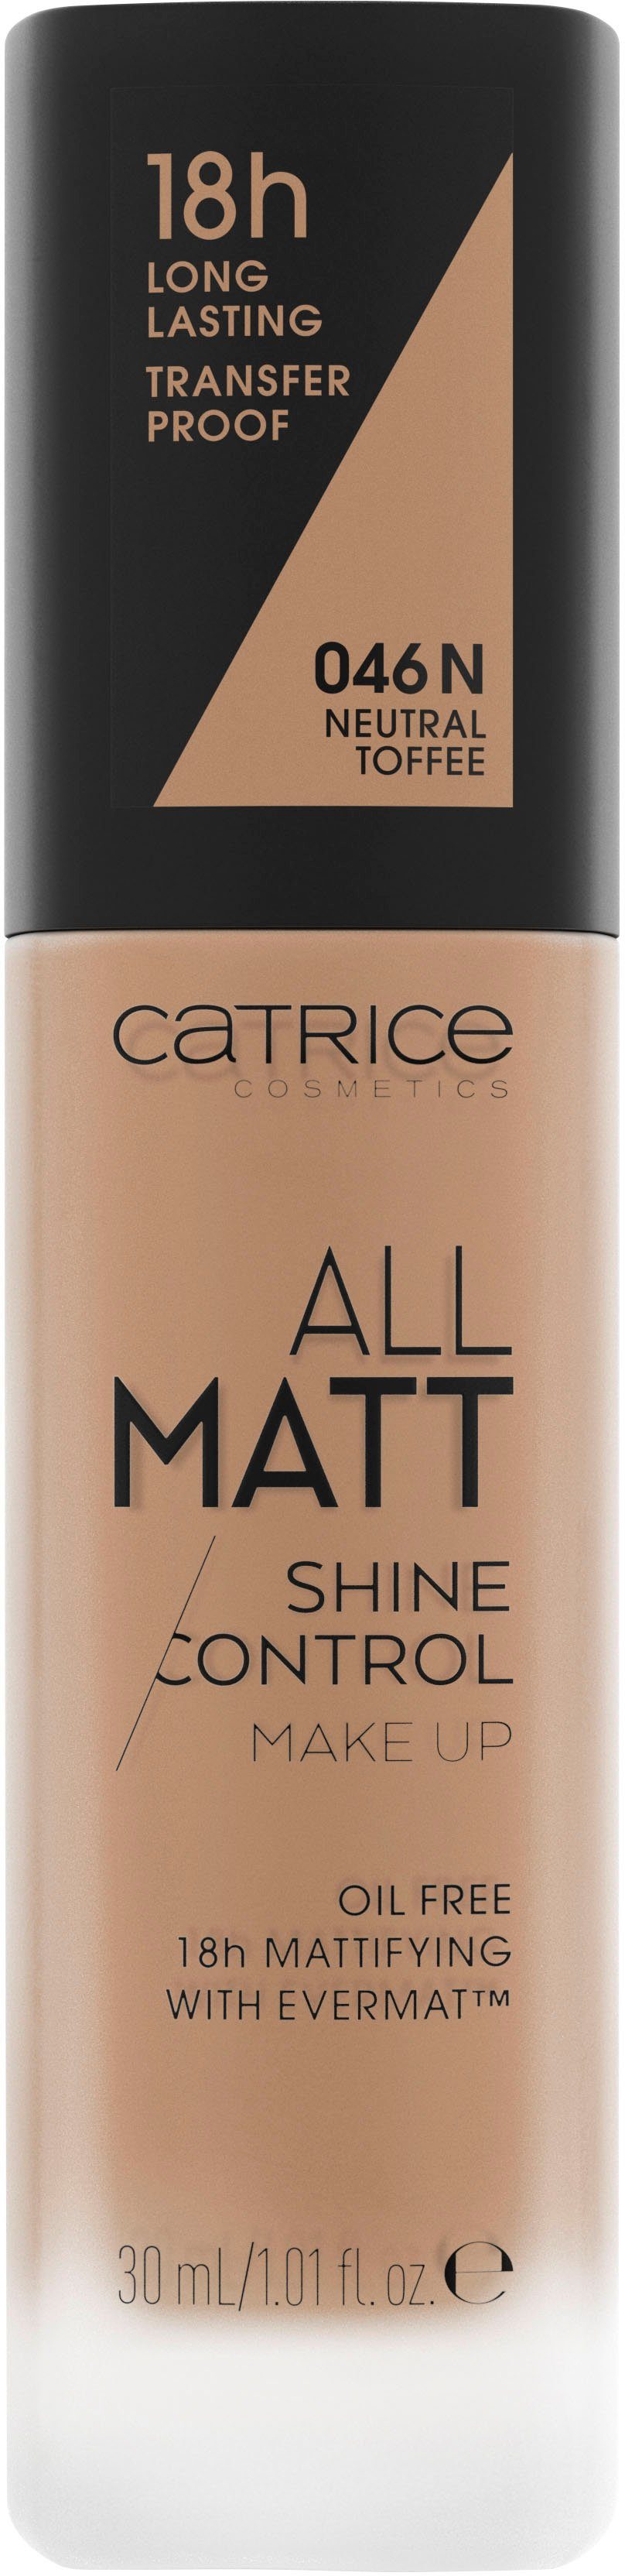 Shine Neutral Foundation Control All Toffee Up Catrice Matt Make